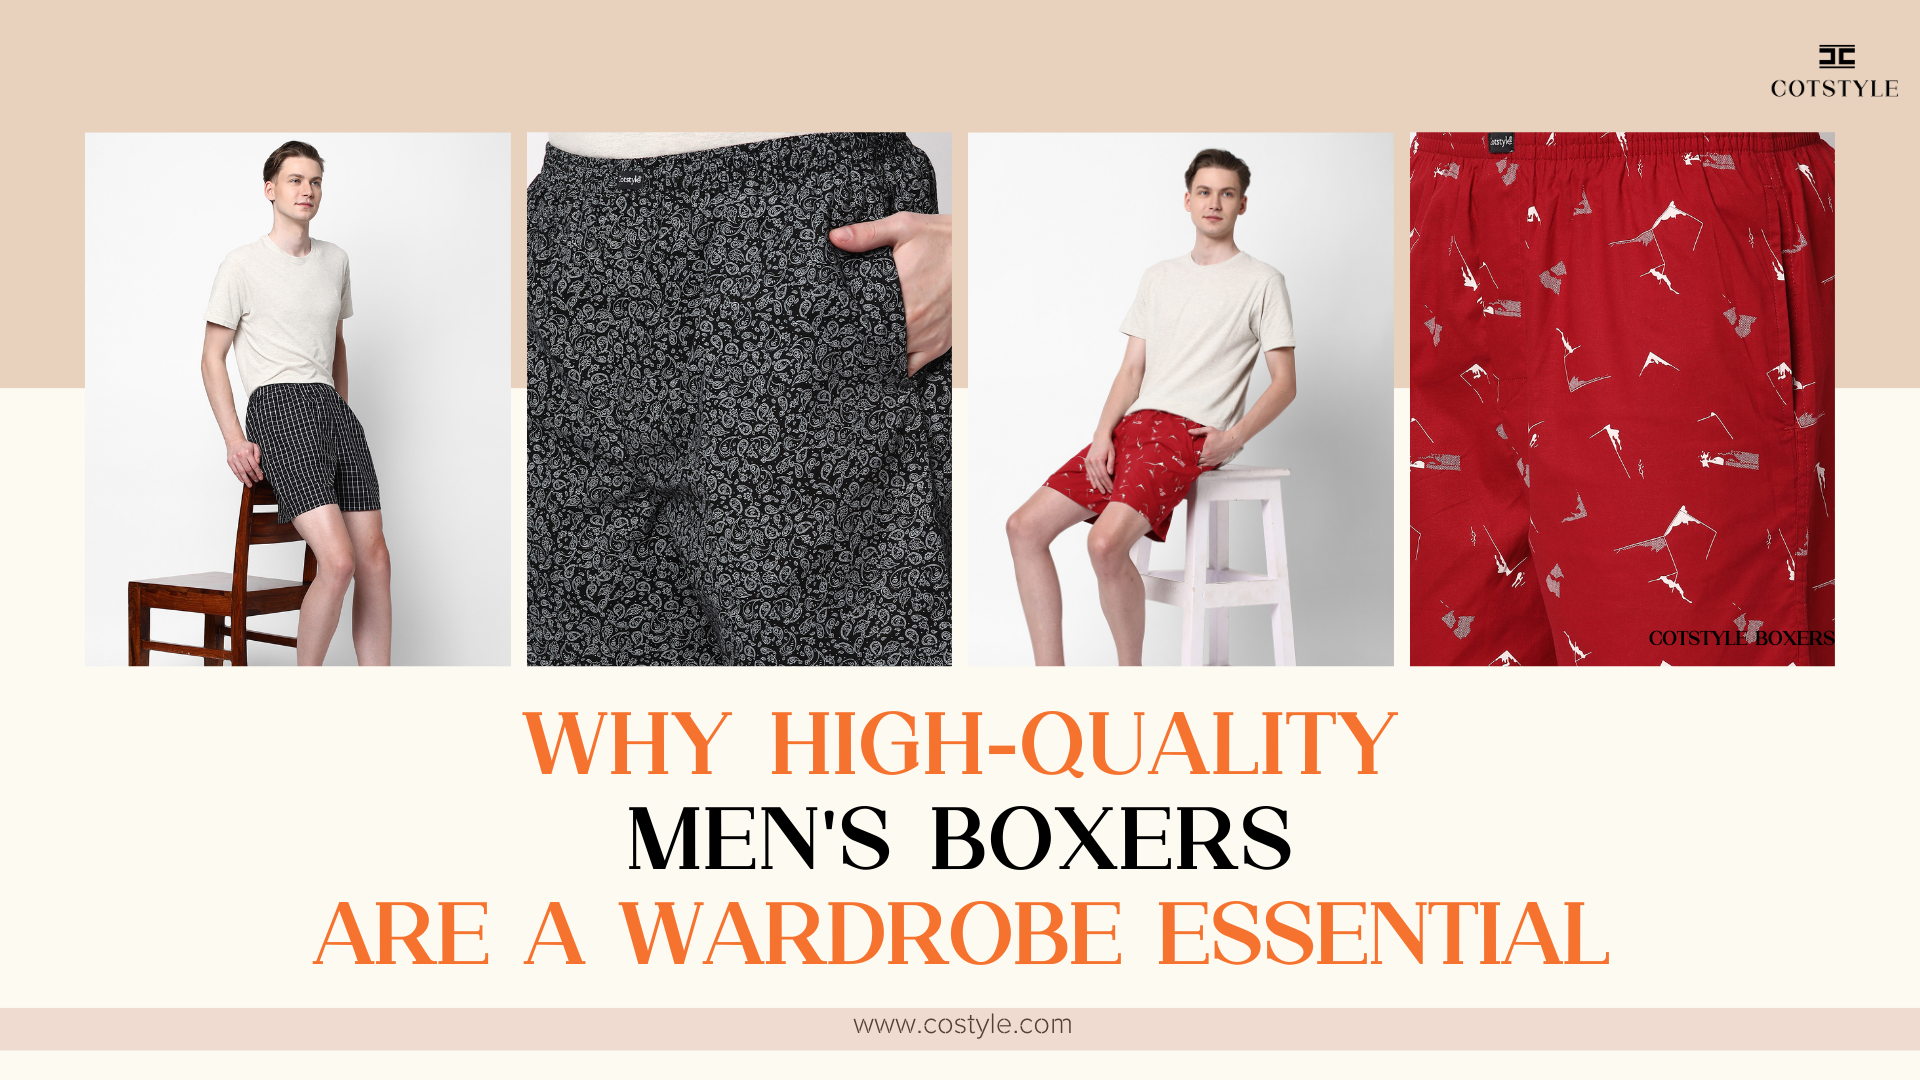 Why High-Quality Men's Boxers Are a Wardrobe Essential